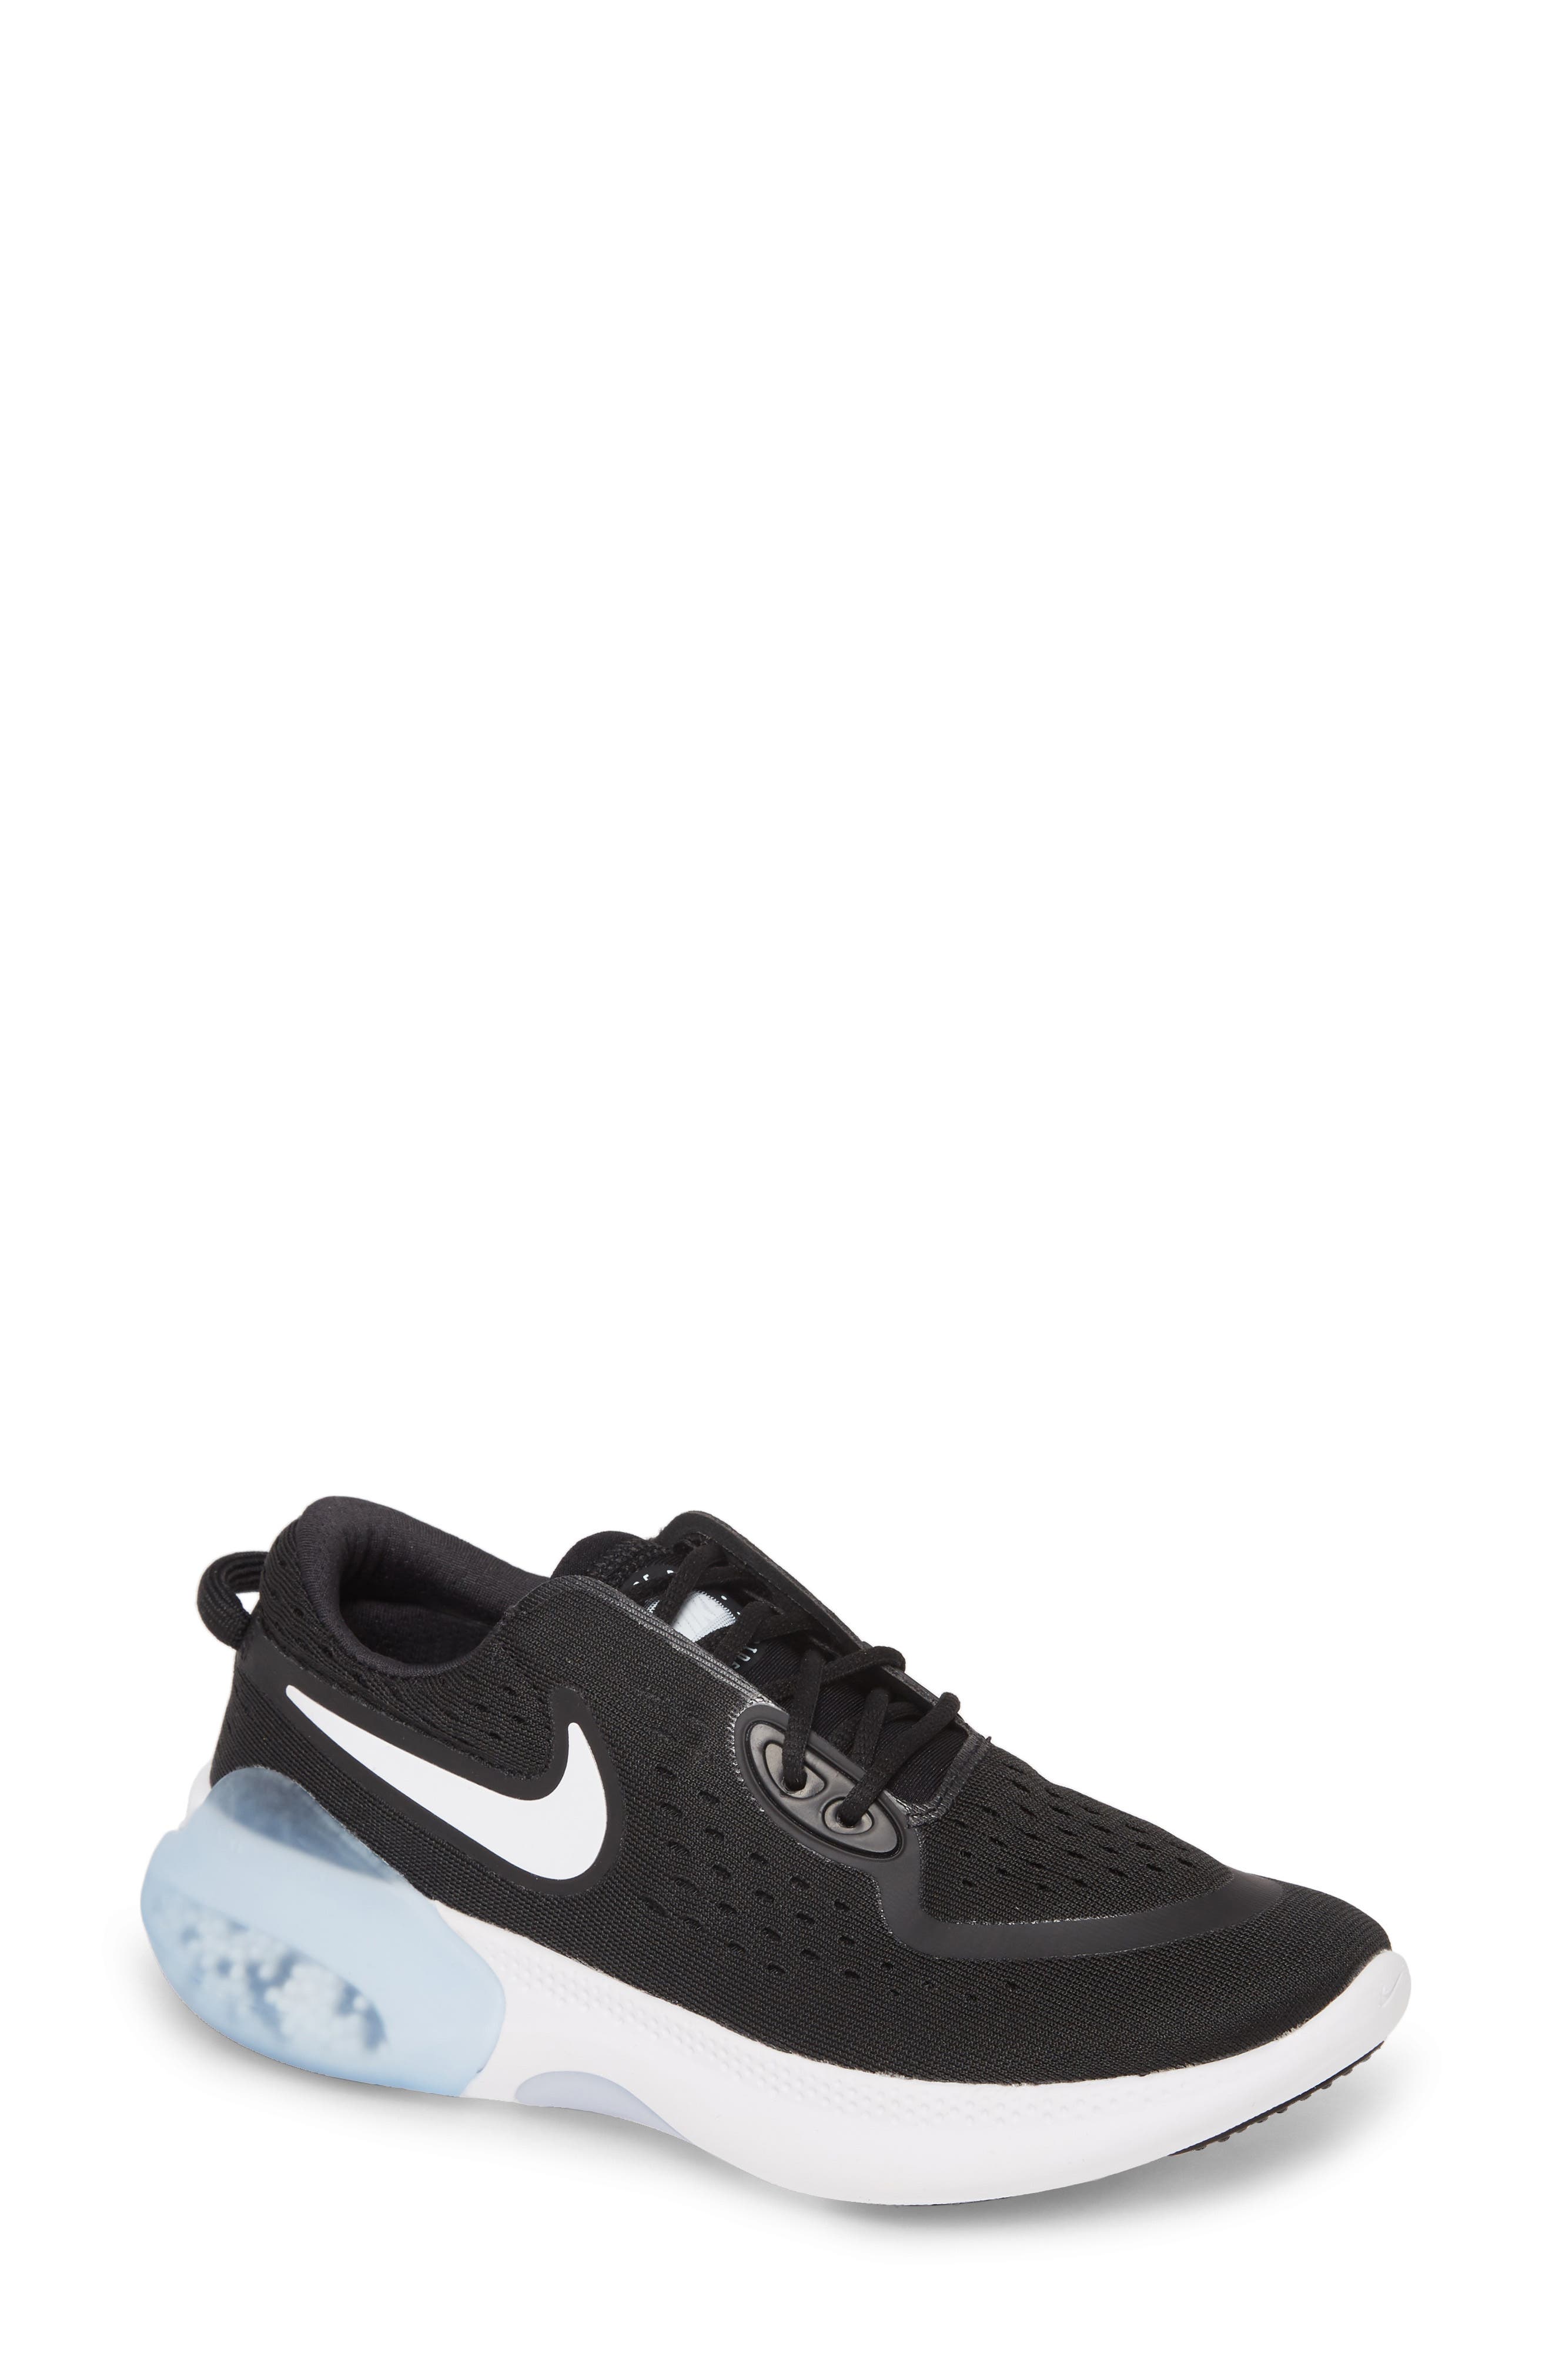 nordstrom womens nike shoes